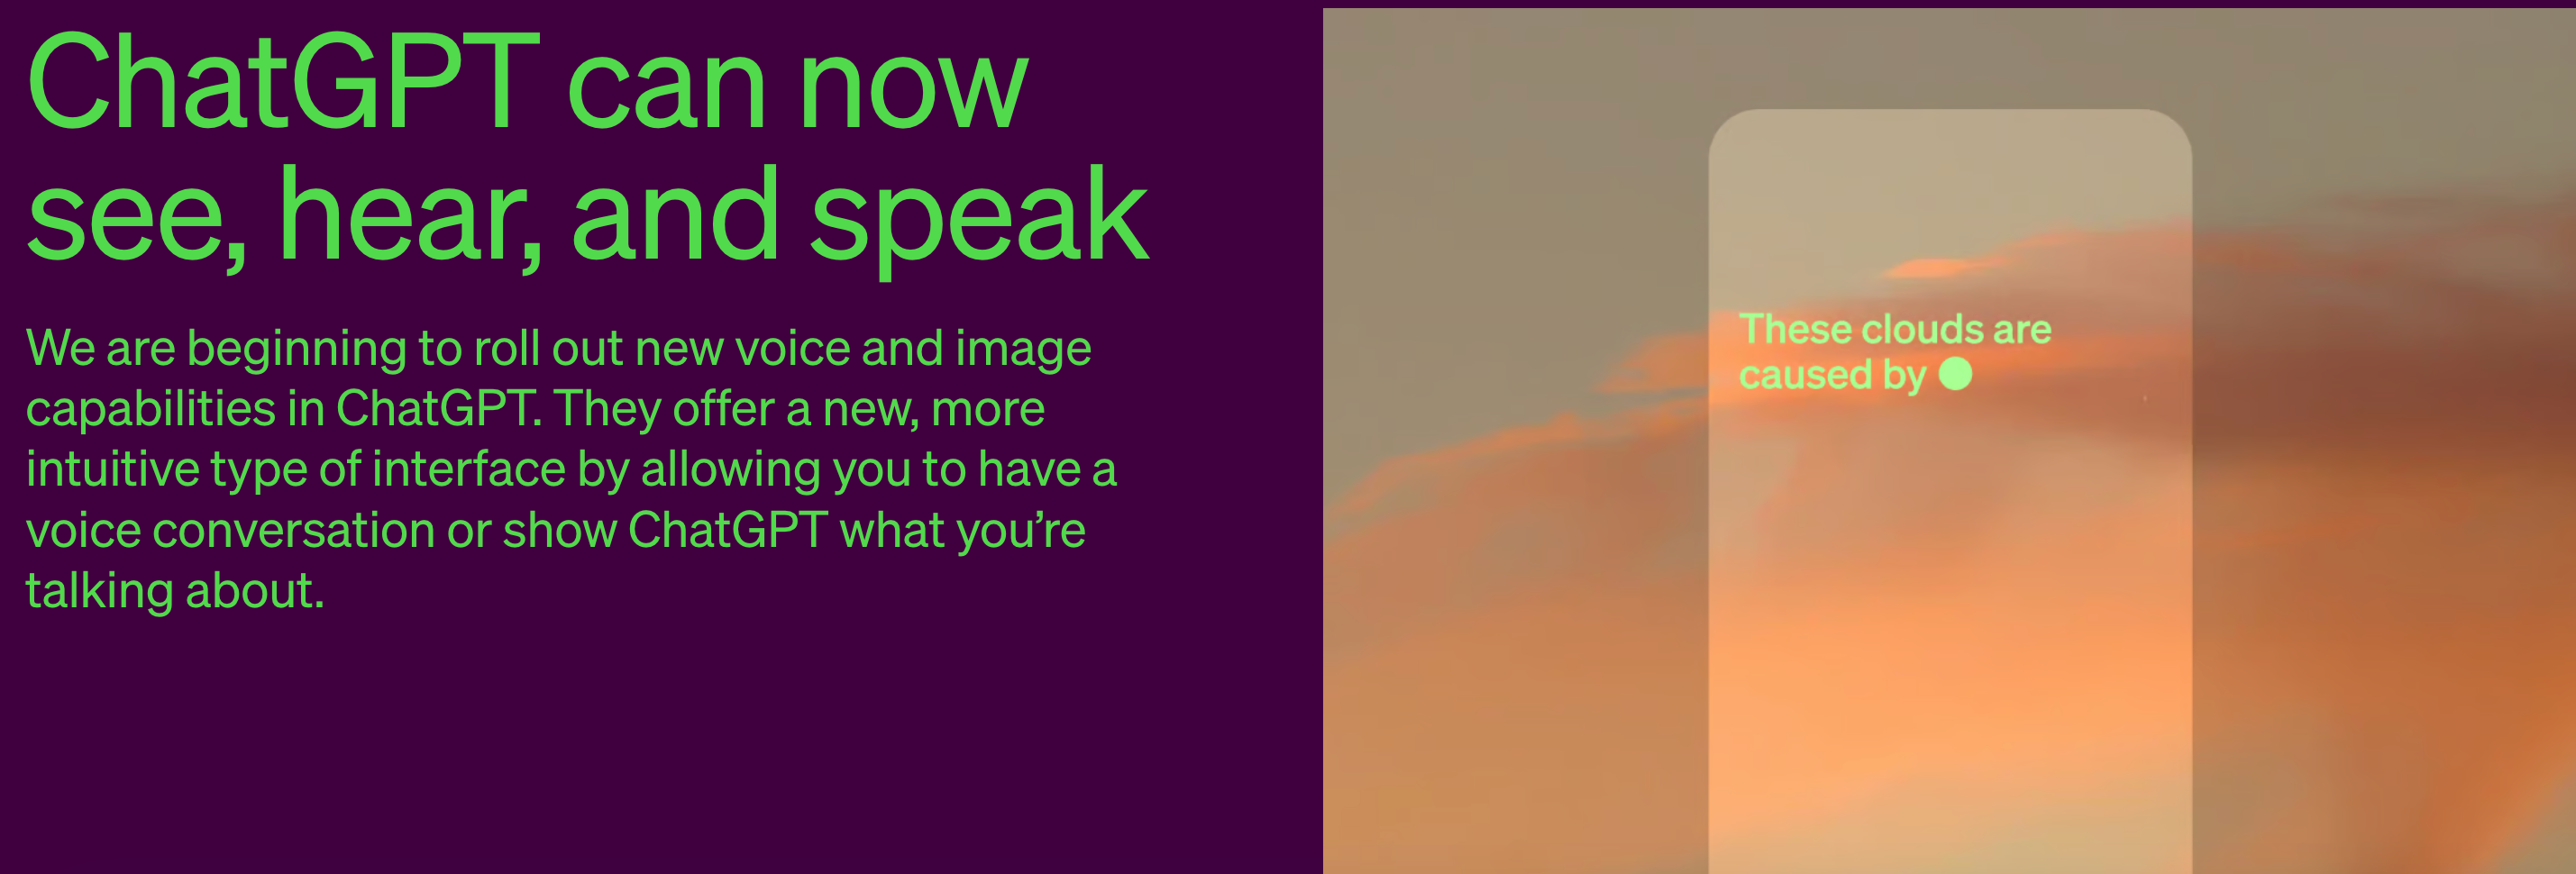 ChatGPT can now see, here, and speak